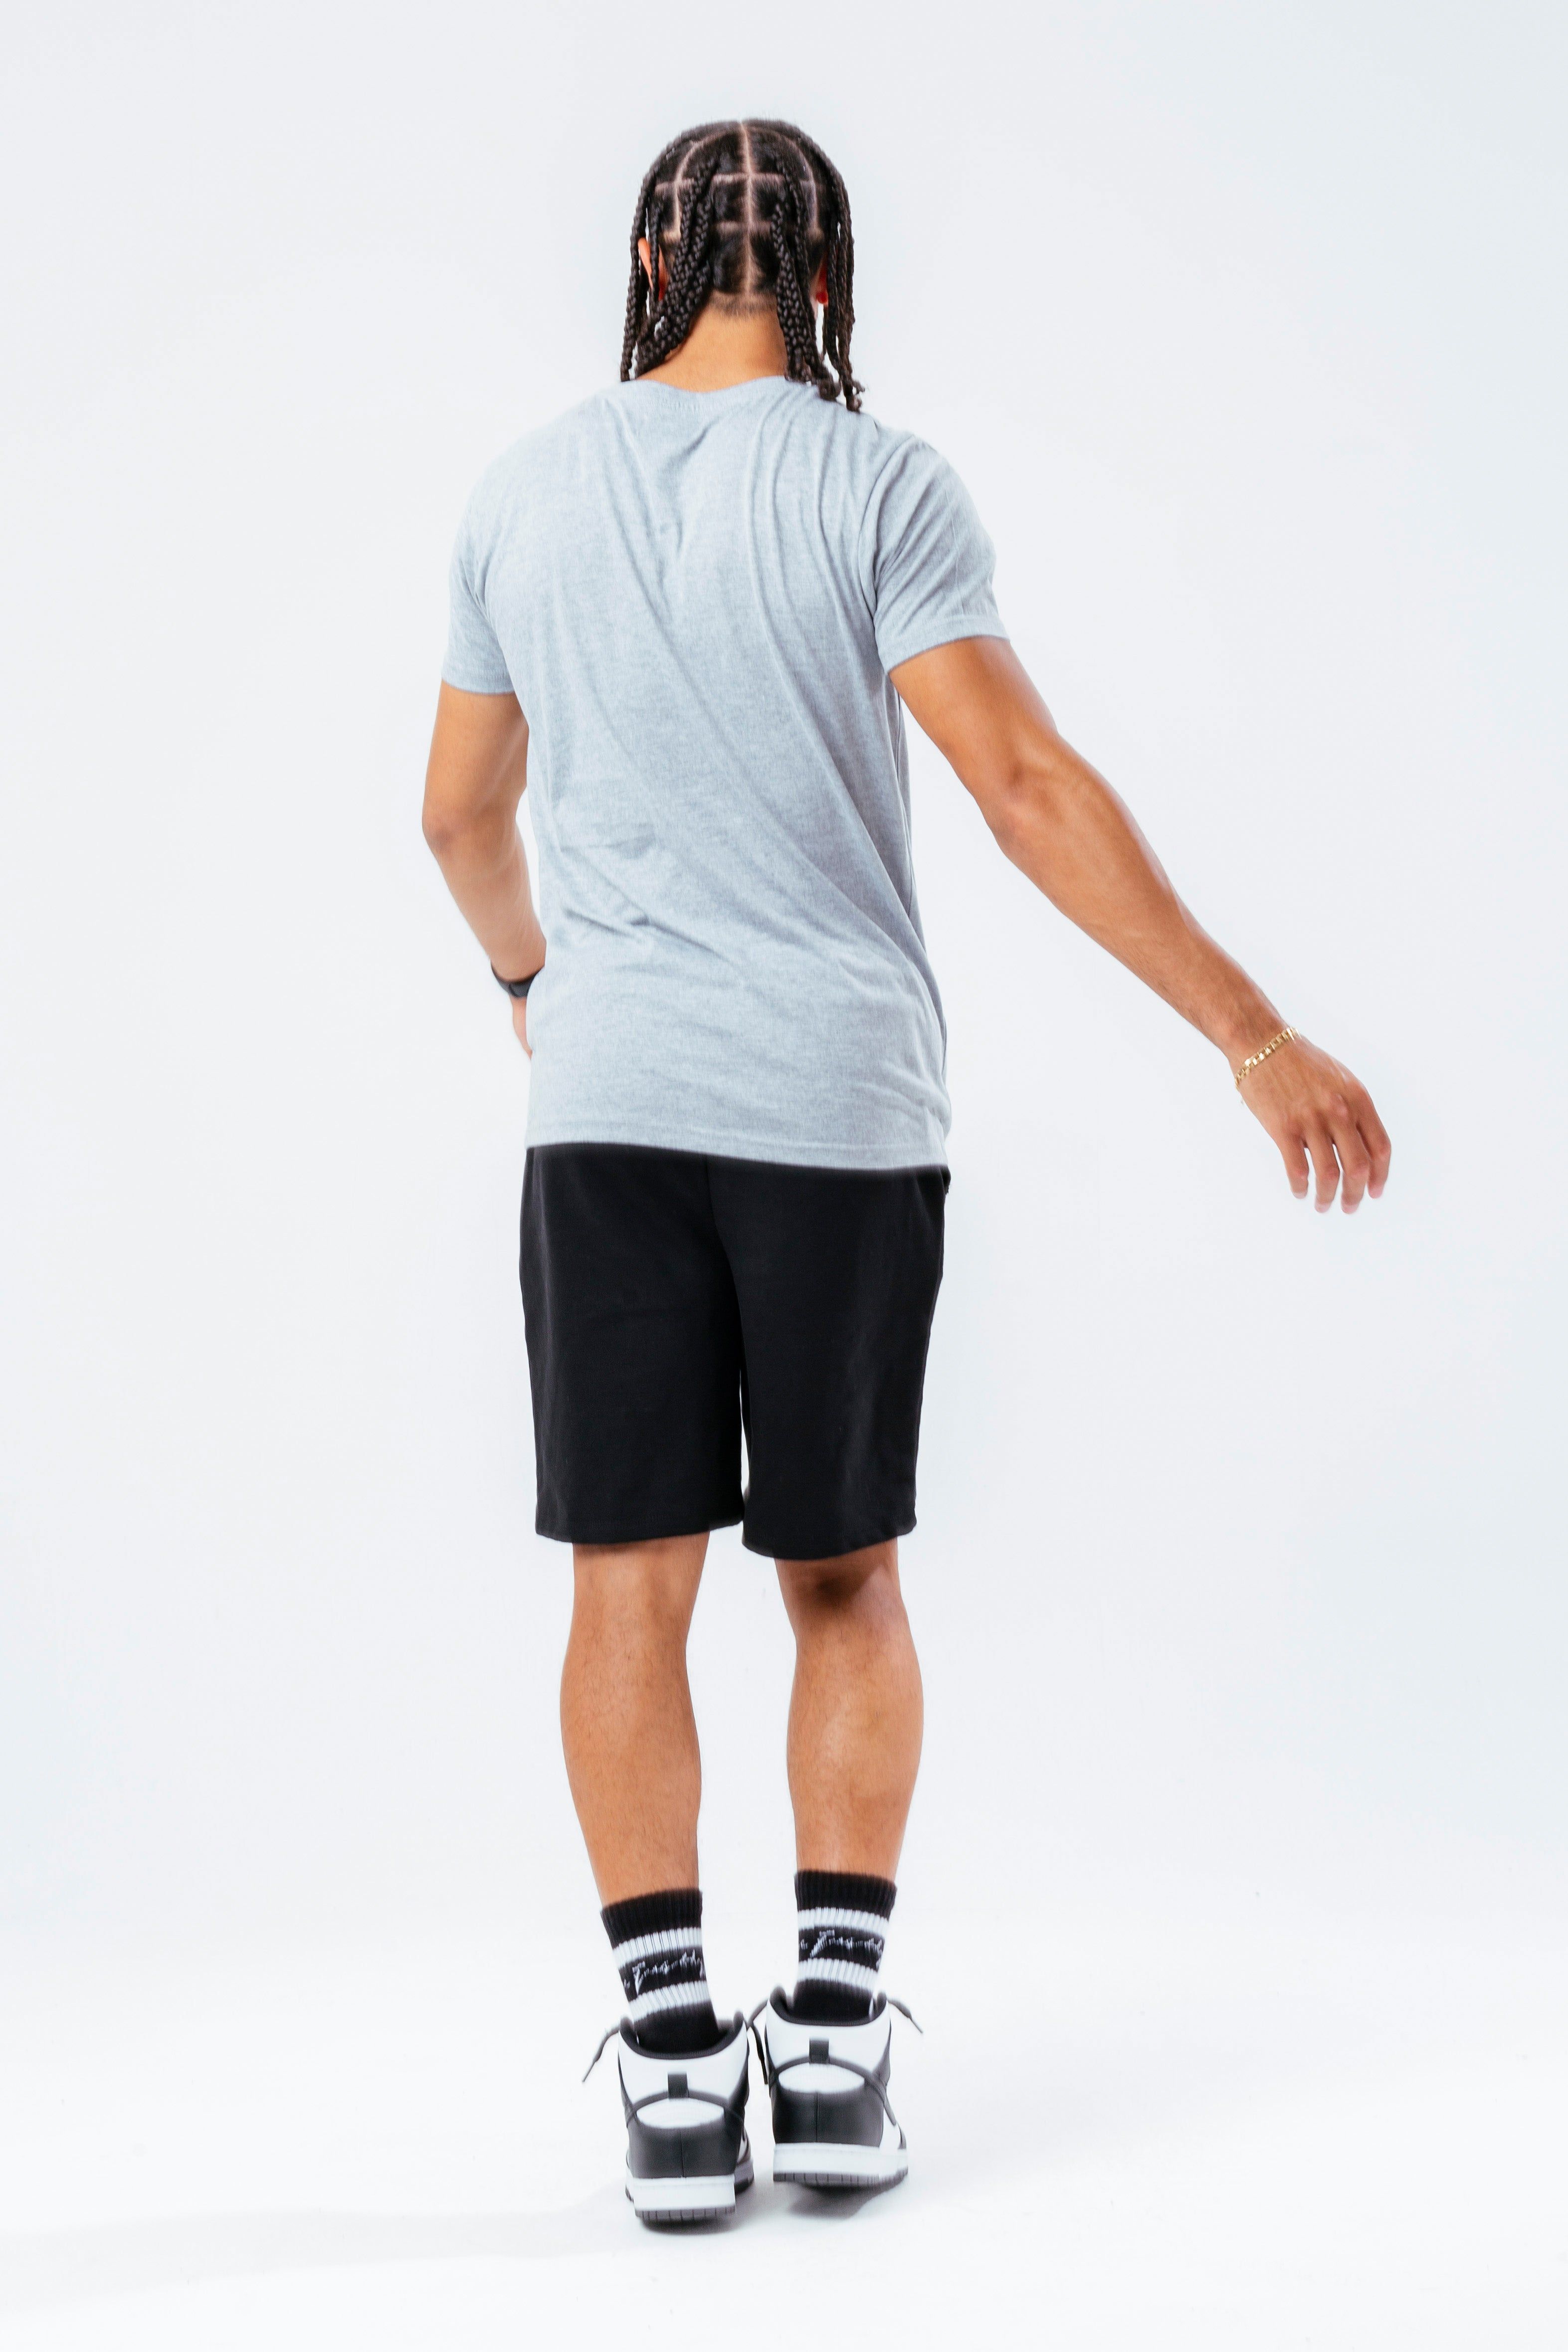 Make the most of your spending and stock up on our Men's 3-pack t-shirts. Each t-shirt is designed with a soft-touch fabric base for the ultimate comfort and breathable fabric. Highlighting a crew neckline and short sleeves for a classic fit. Your everyday tees just got simpler. The model wears a size M. Machine washable.